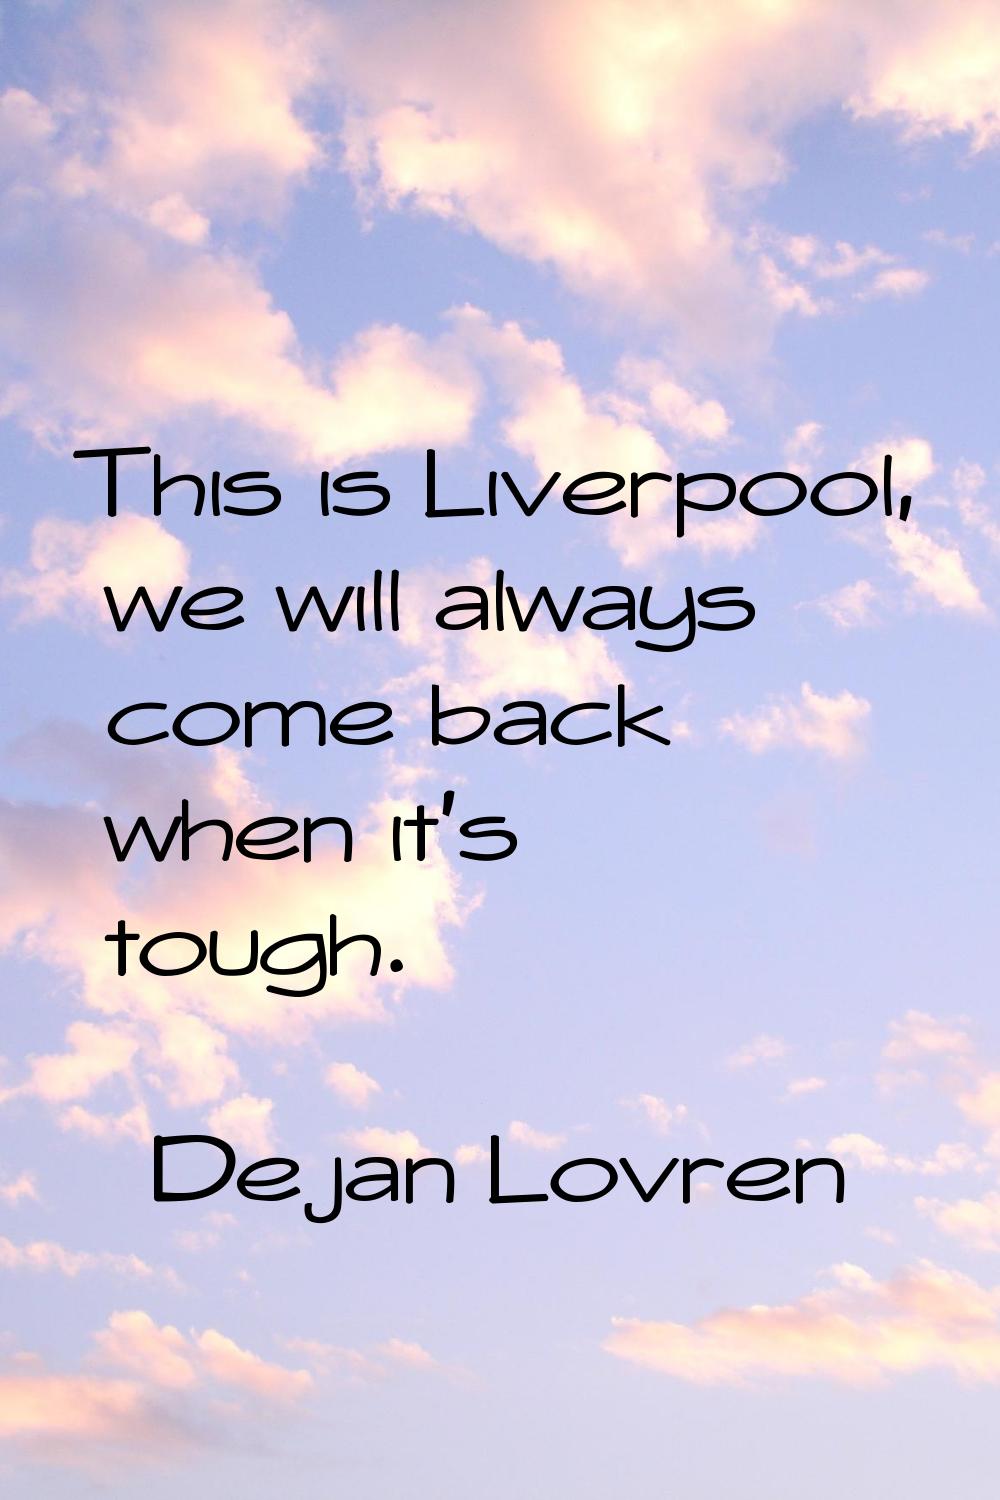 This is Liverpool, we will always come back when it's tough.